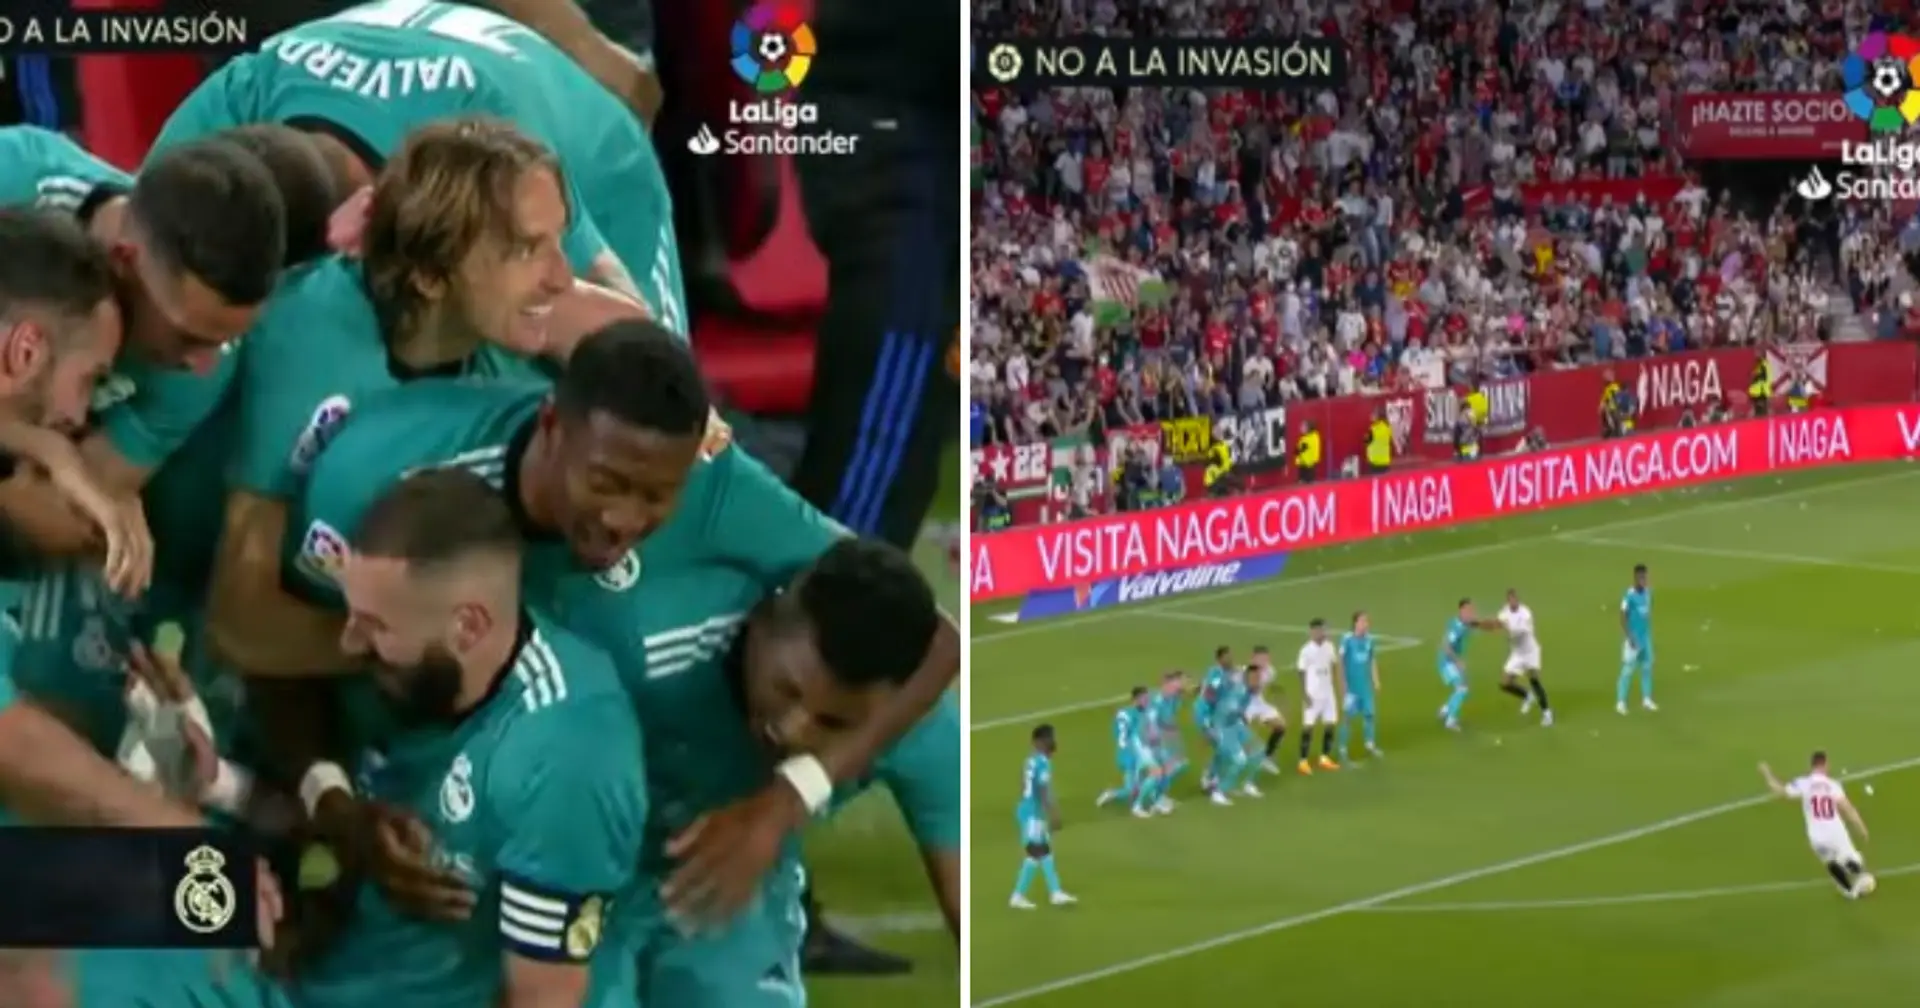 How good was Real Madrid's defence and attack against Sevilla? Rated